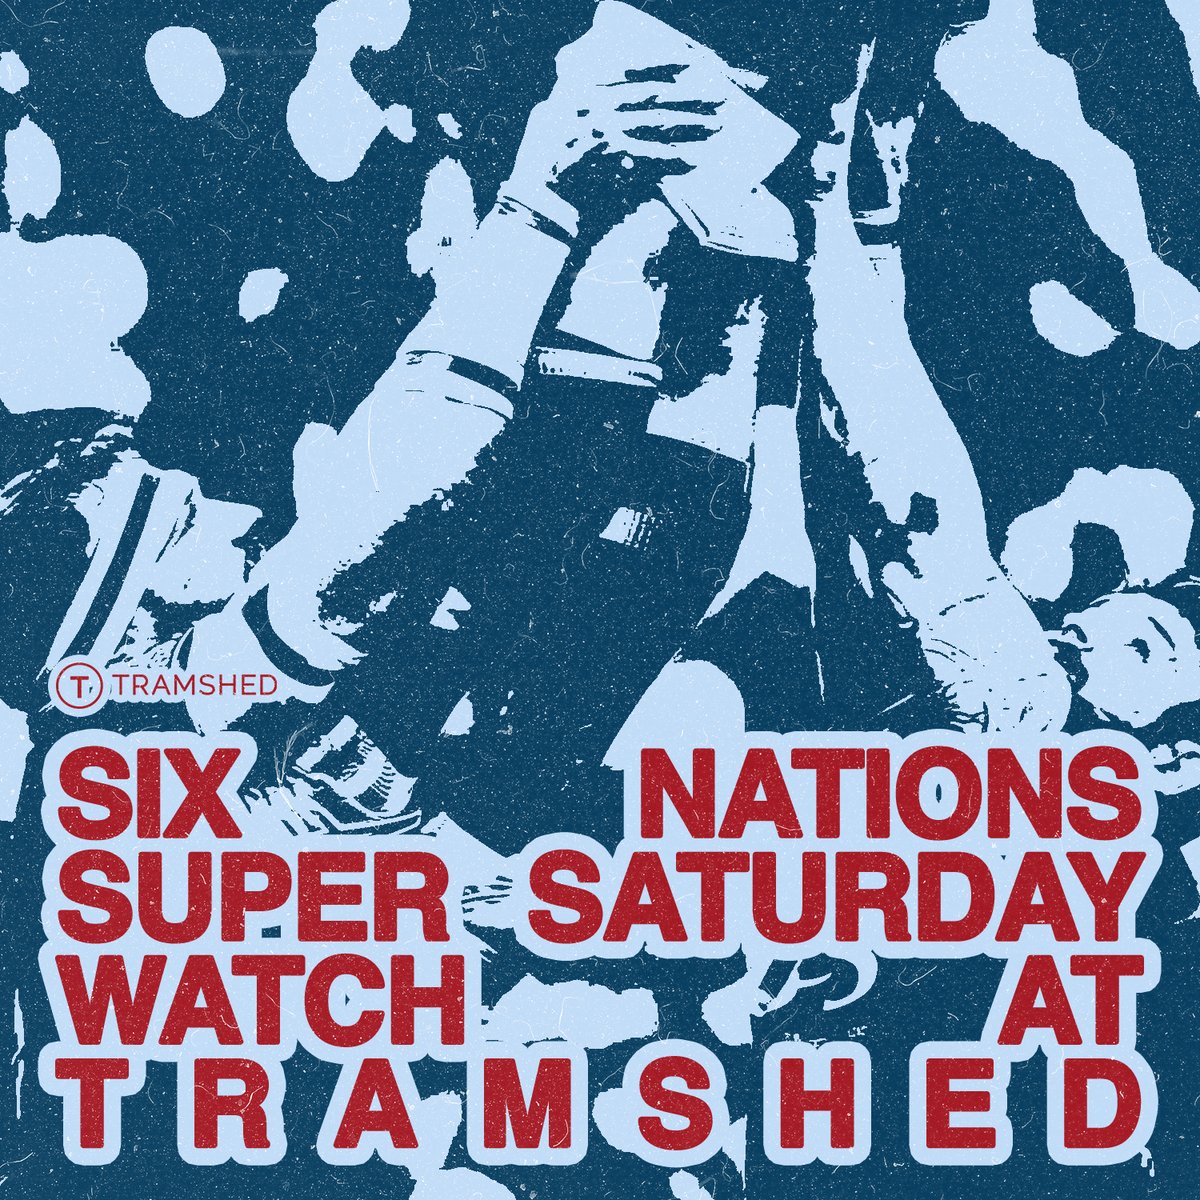 Join us for Super Saturday!🏉🍻 Tomorrow we'll be opening our doors at 1pm to bring you all the excitement of the Six Nations matches on our big screen. We will be showing all matches, so come down early to get a seat. Don't miss out on the electrifying atmosphere of match day!